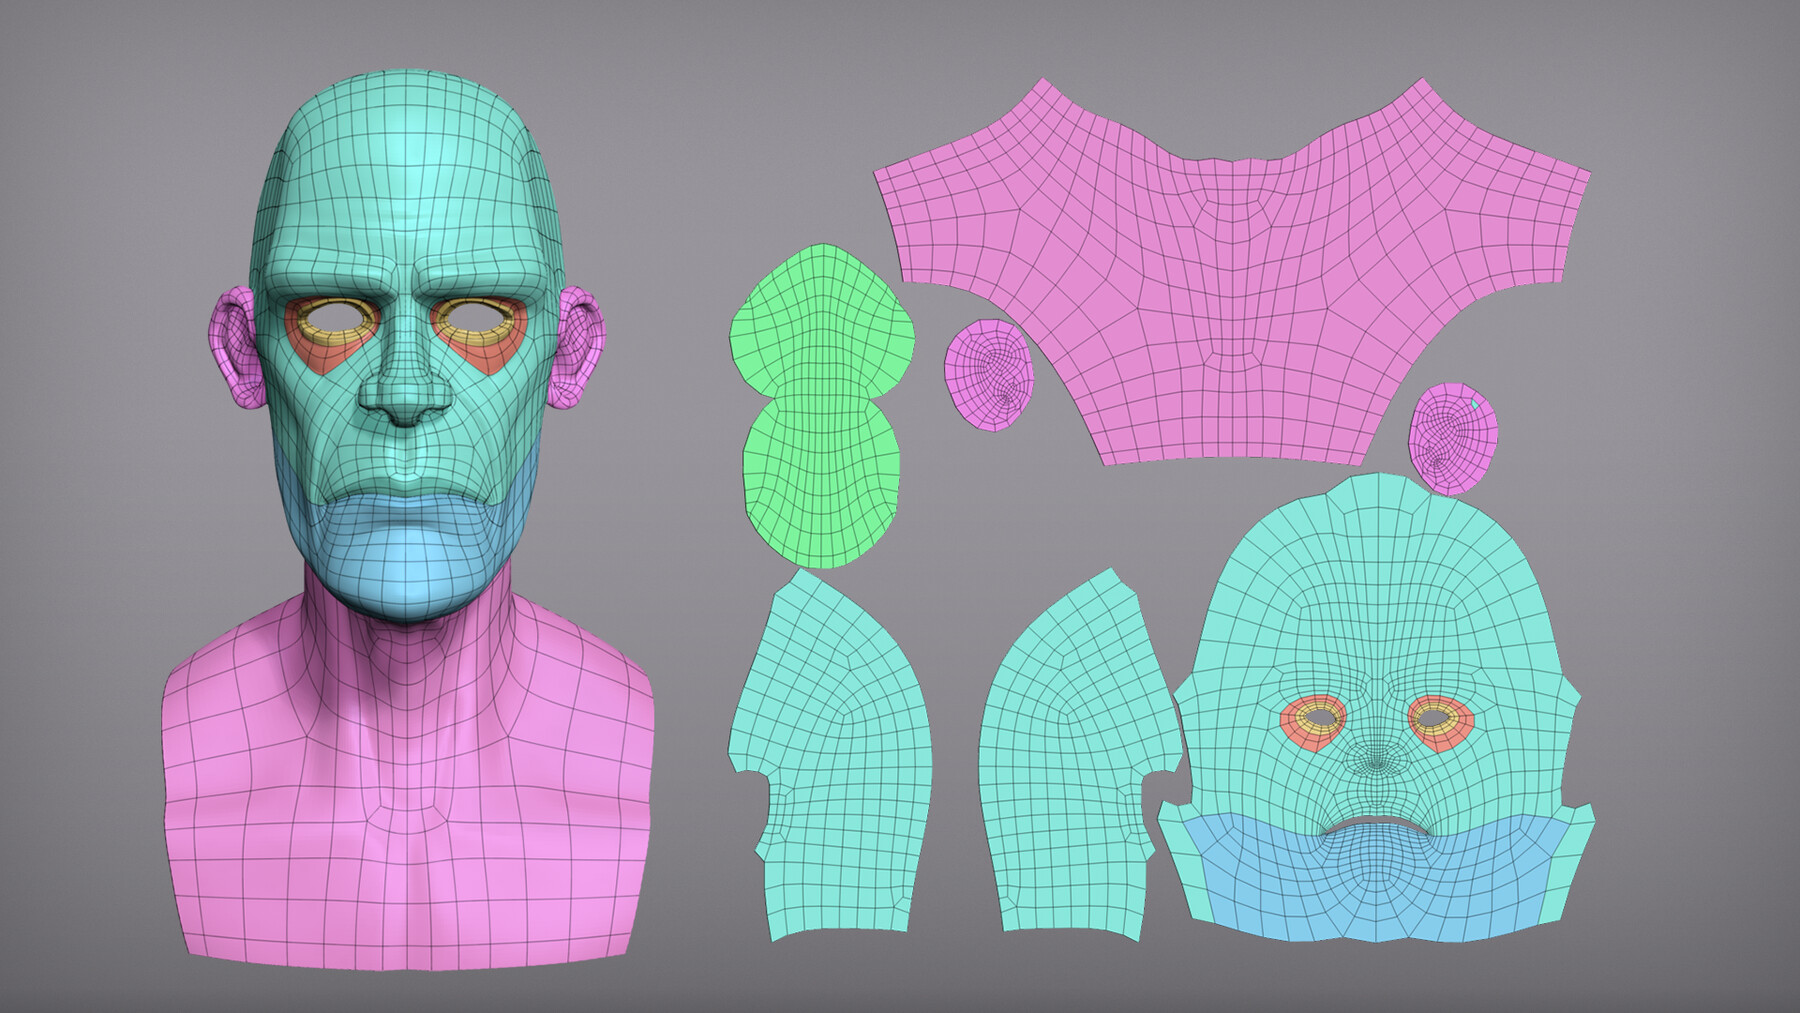 ArtStation - Cartoon male character Christopher base mesh | Resources